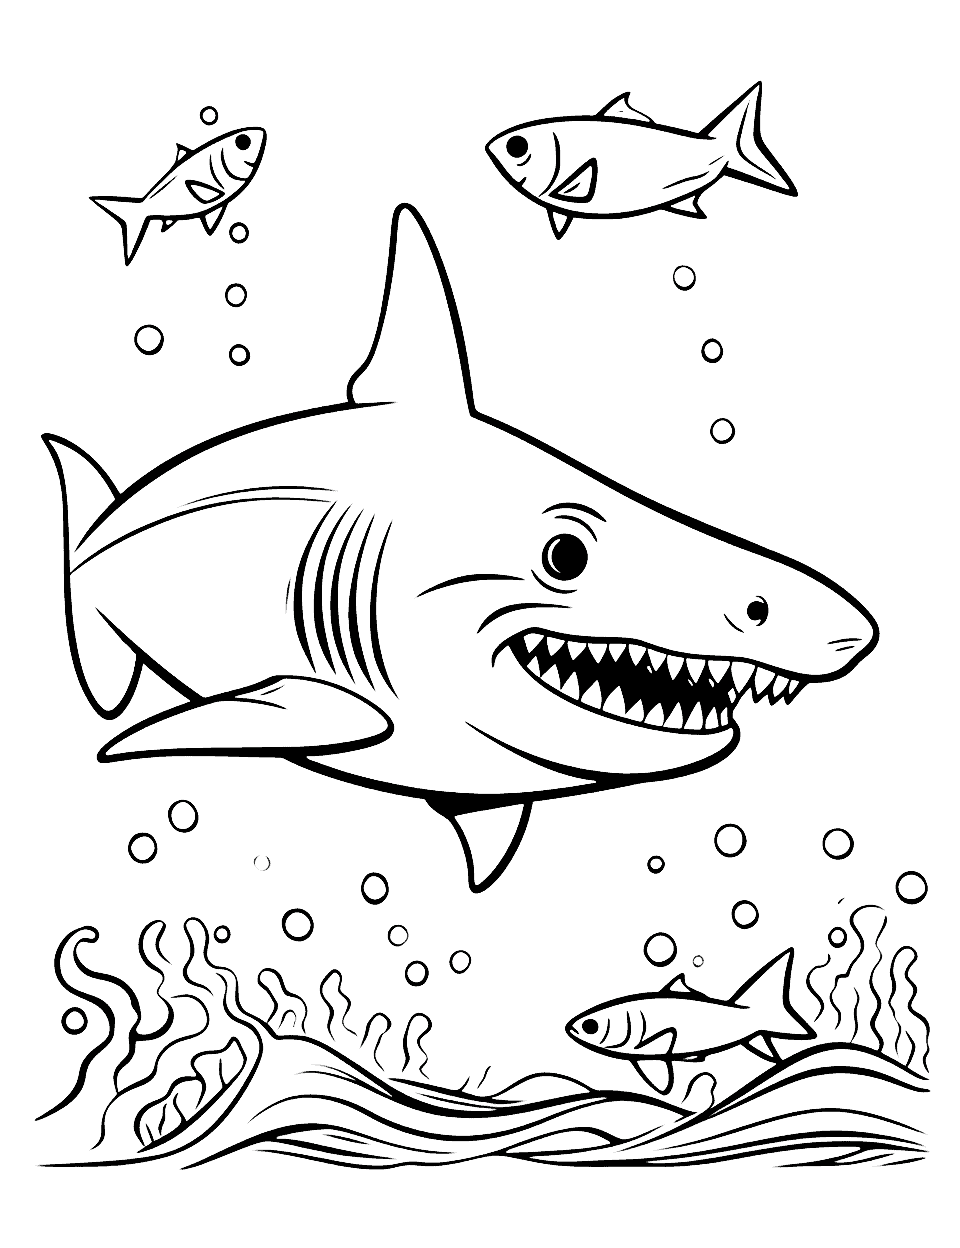 Angel Shark and Fish Coloring Page - An angel shark surrounded by beautiful fish under the water.